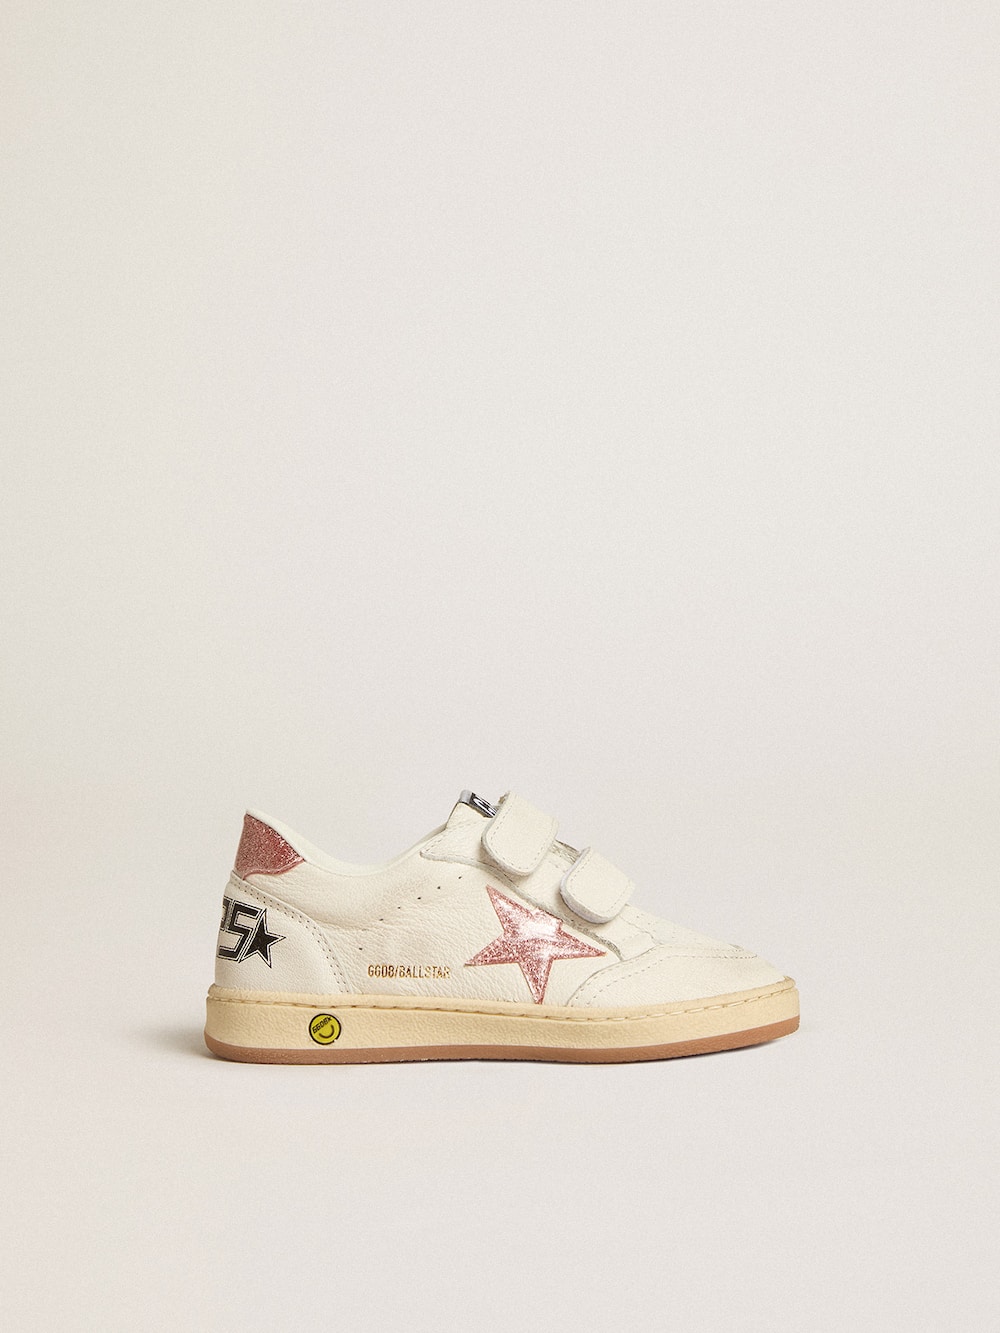 Golden Goose - Ball Star Junior in nappa with peach-pink glitter star and heel tab in 